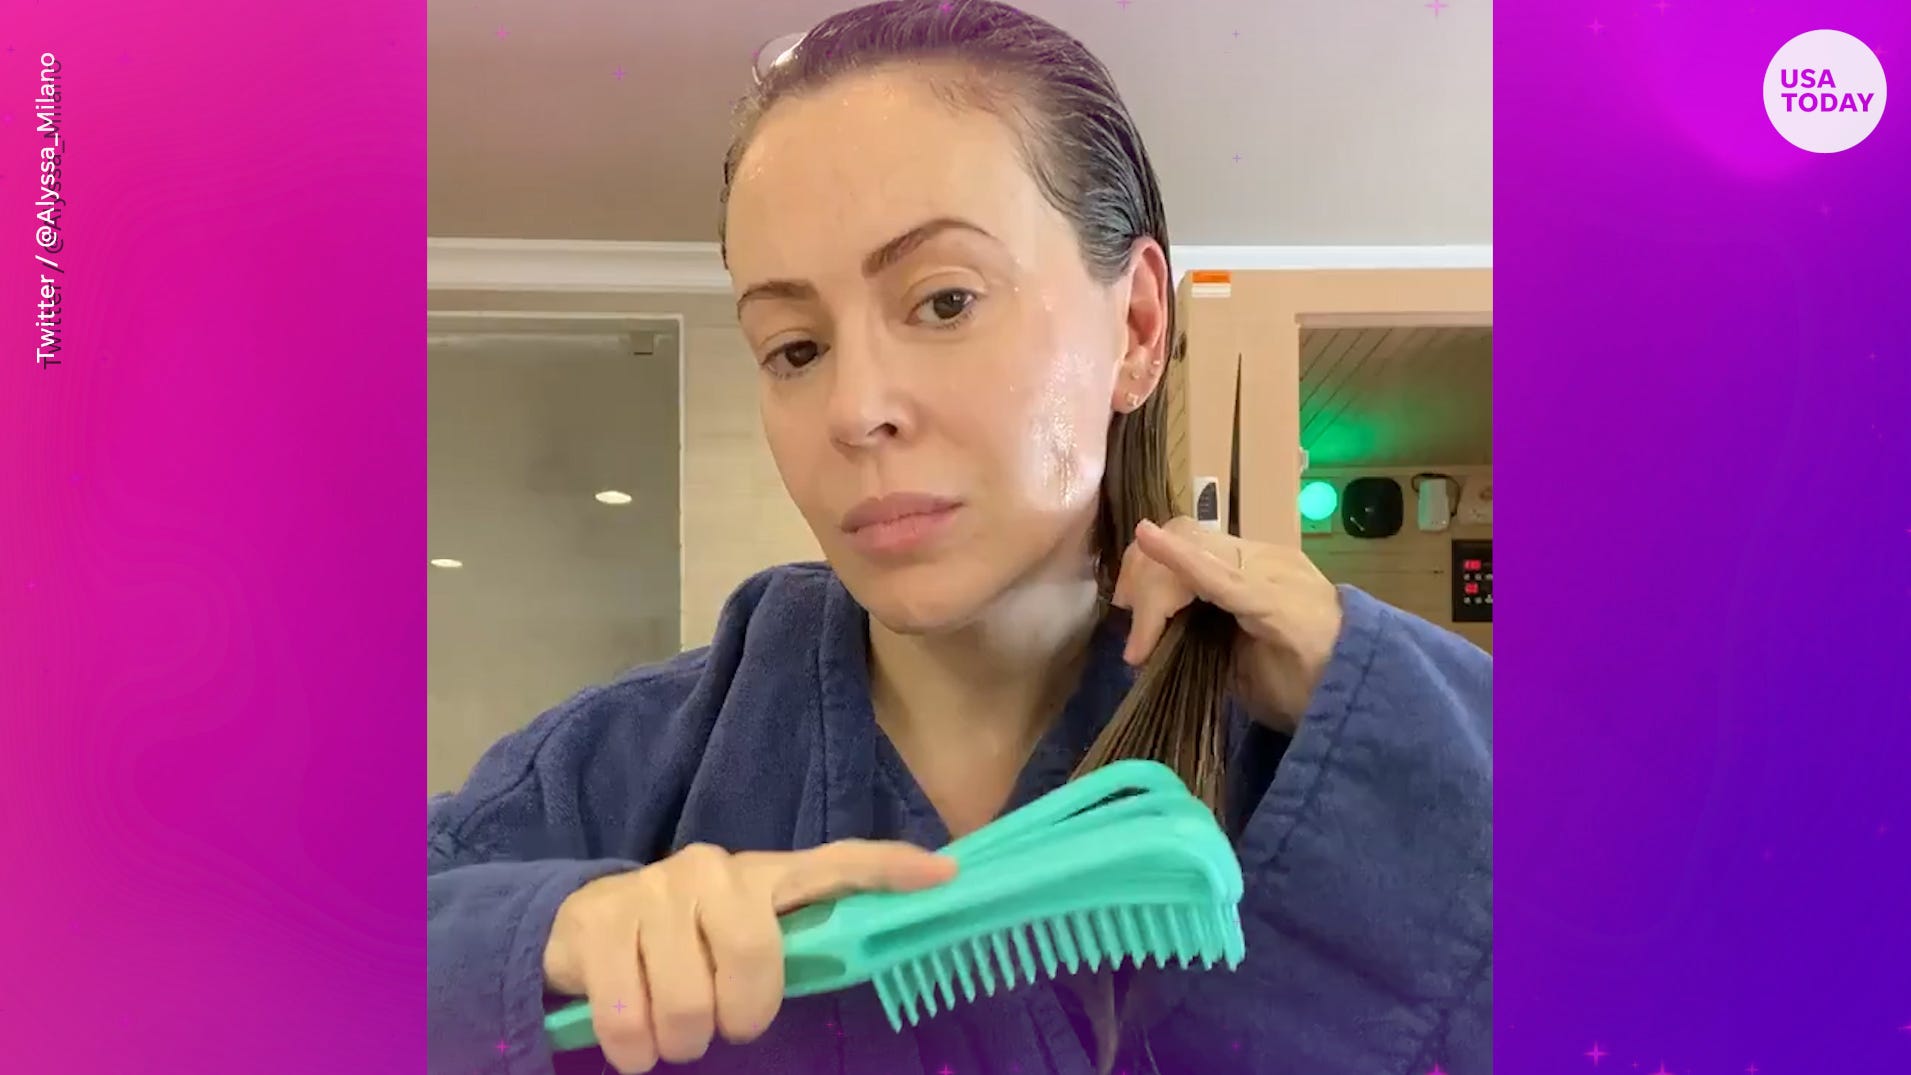 Alyssa Milano believes she's losing her hair due to COVID-19